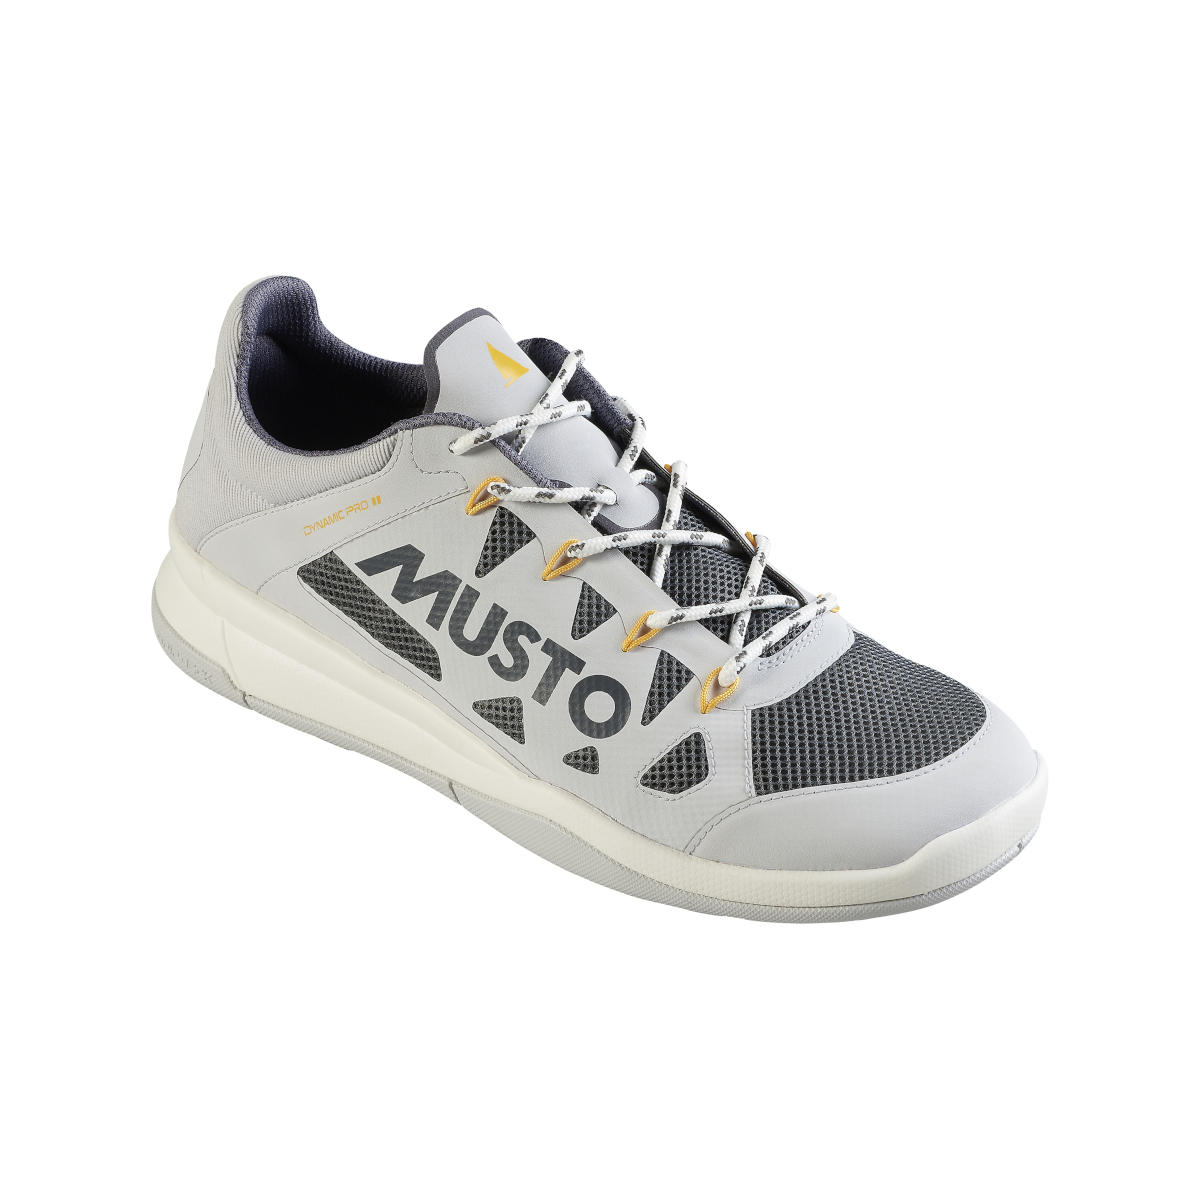 Musto Dynamic Pro II Adapt chaussures bateau homme gris clair / jaune, taille 42